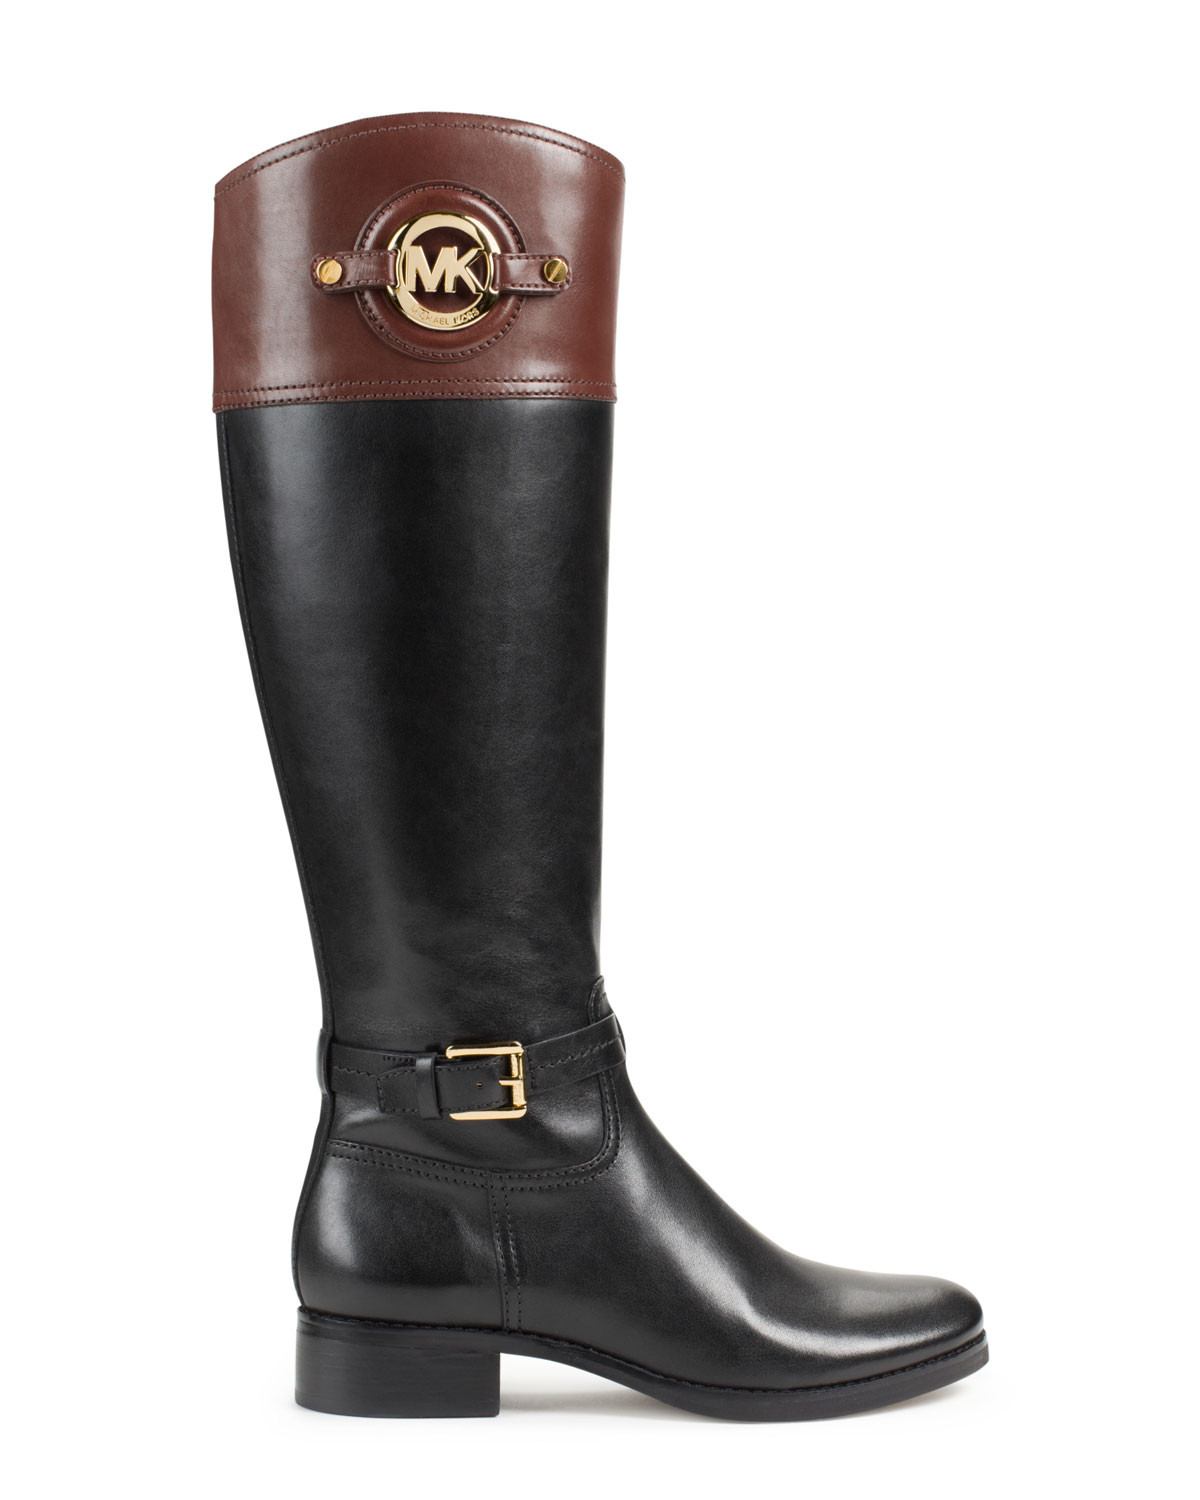 Michael Kors Black Stockard Two Tone Leather Riding Boot Product 1 12841460 3 910966817 Normal 